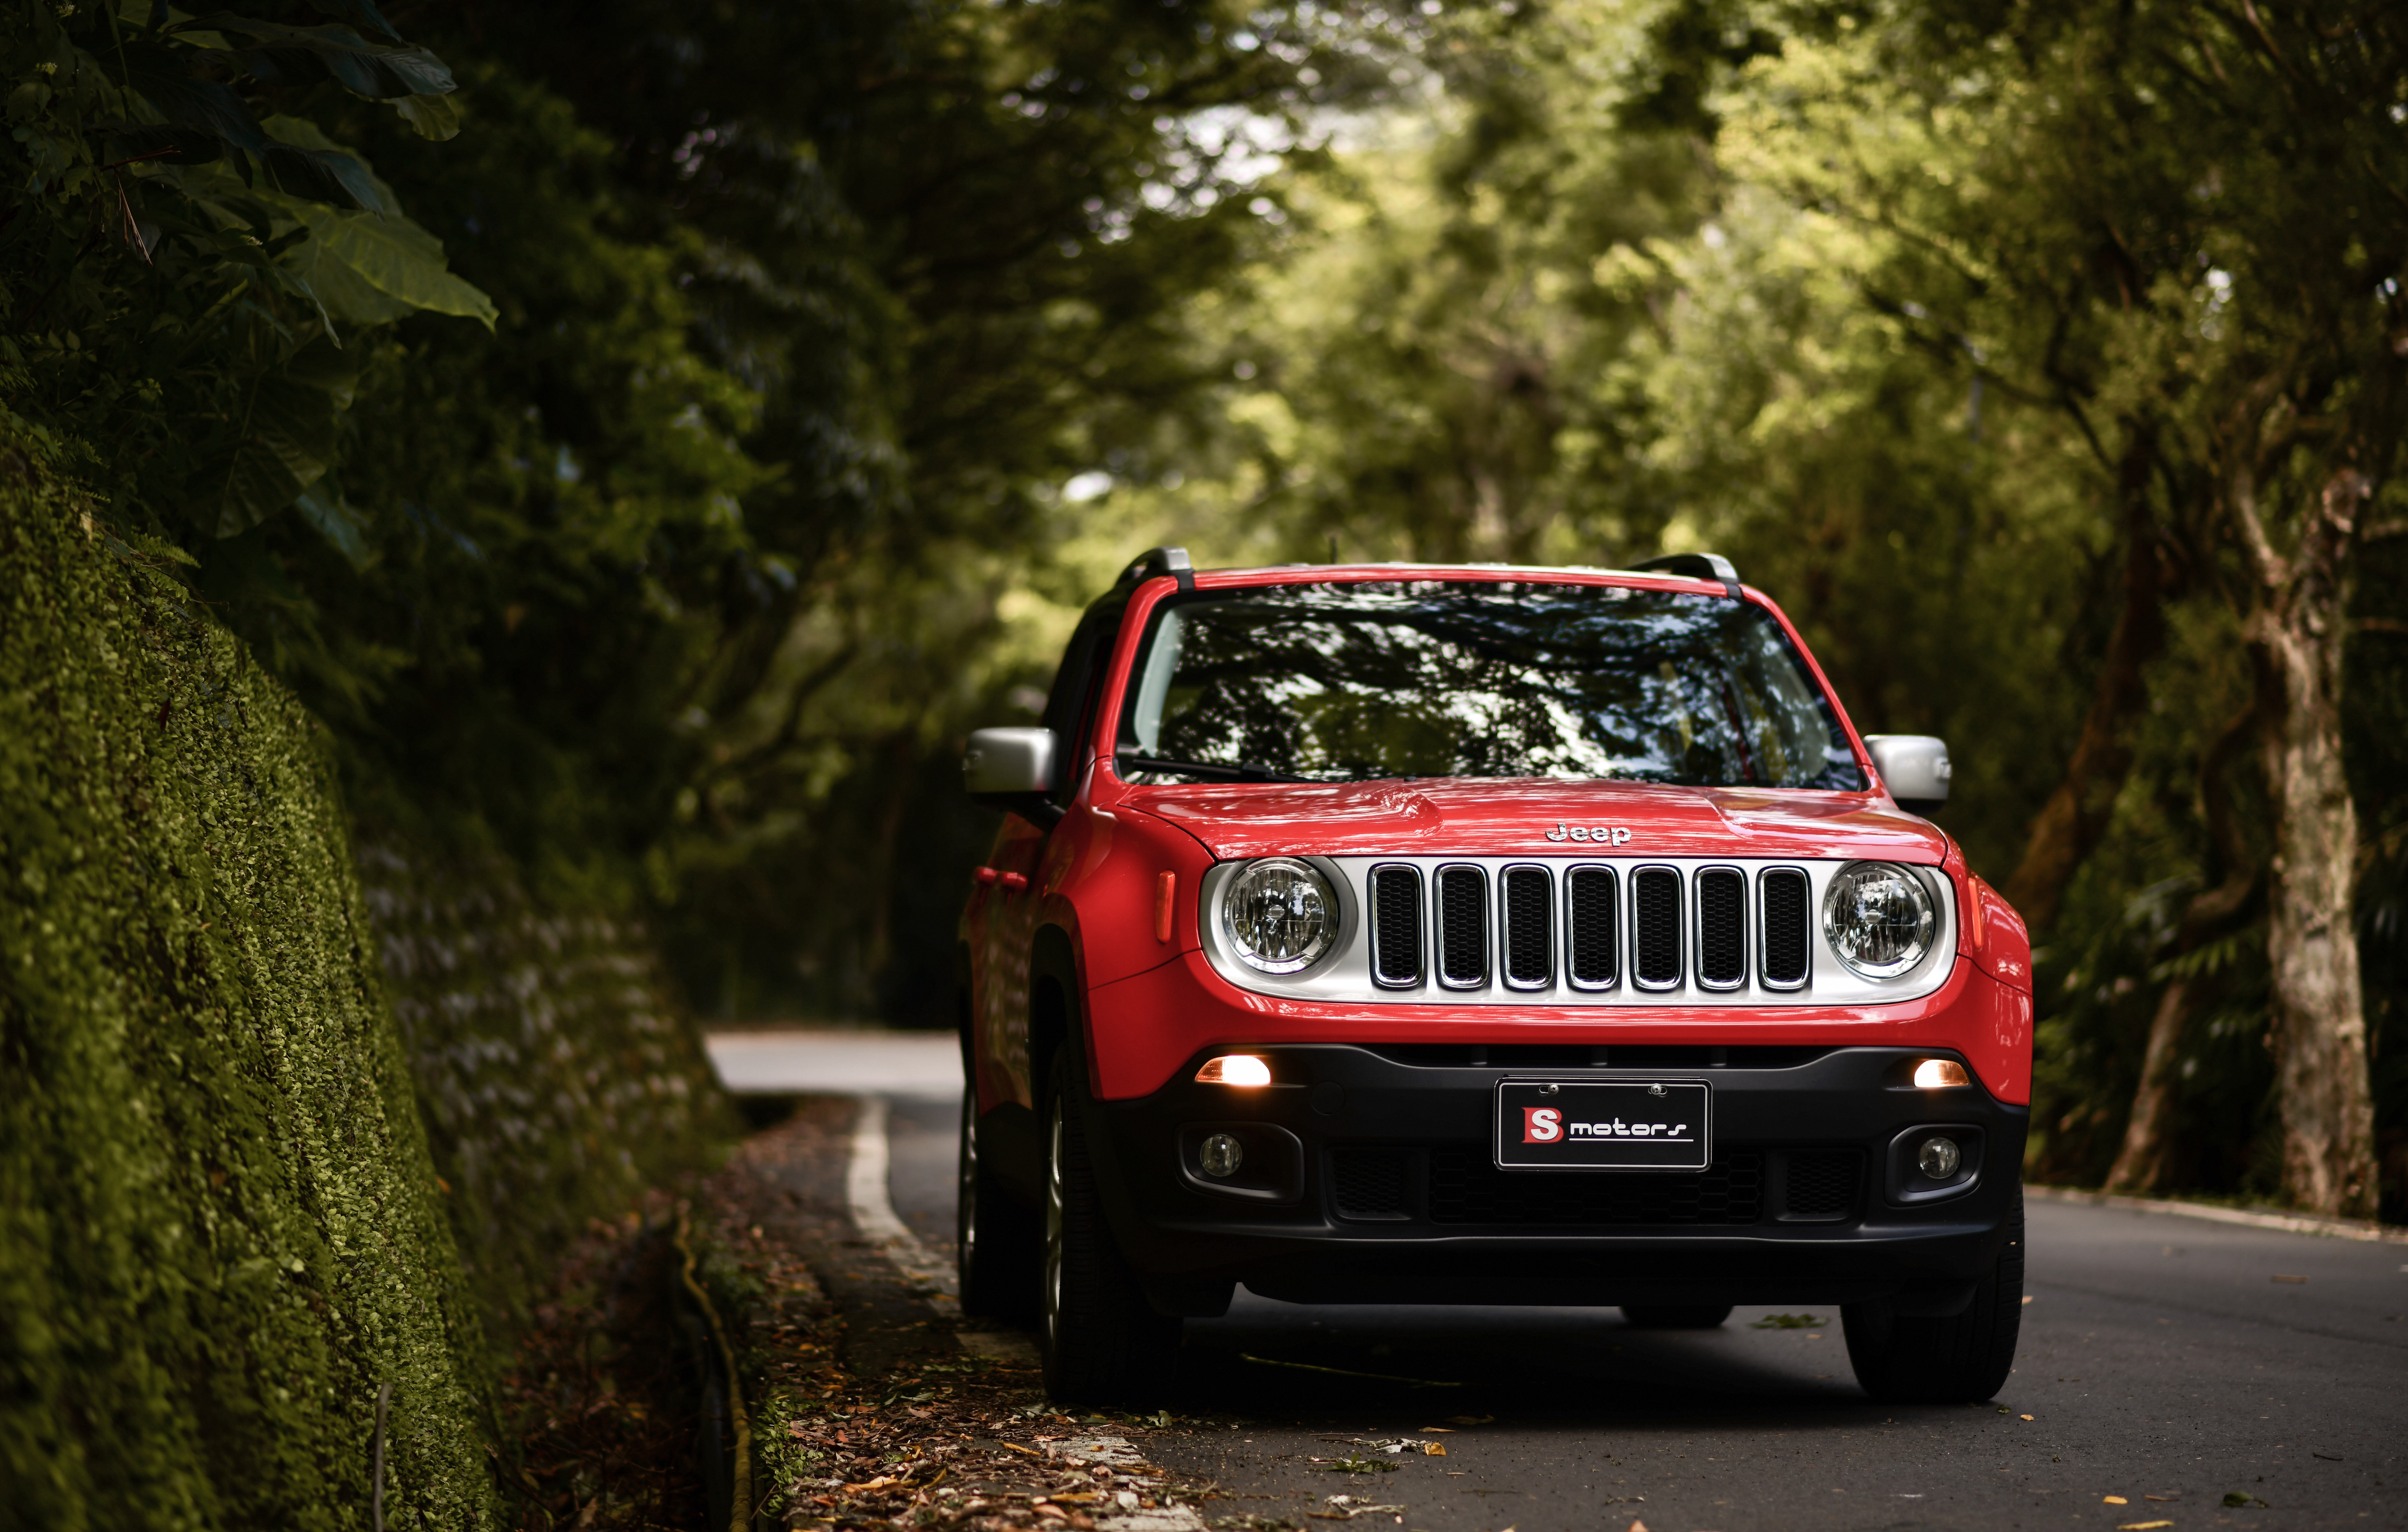 jeep, suv, cars, front view, red, car, machine, jeep renegade Full HD